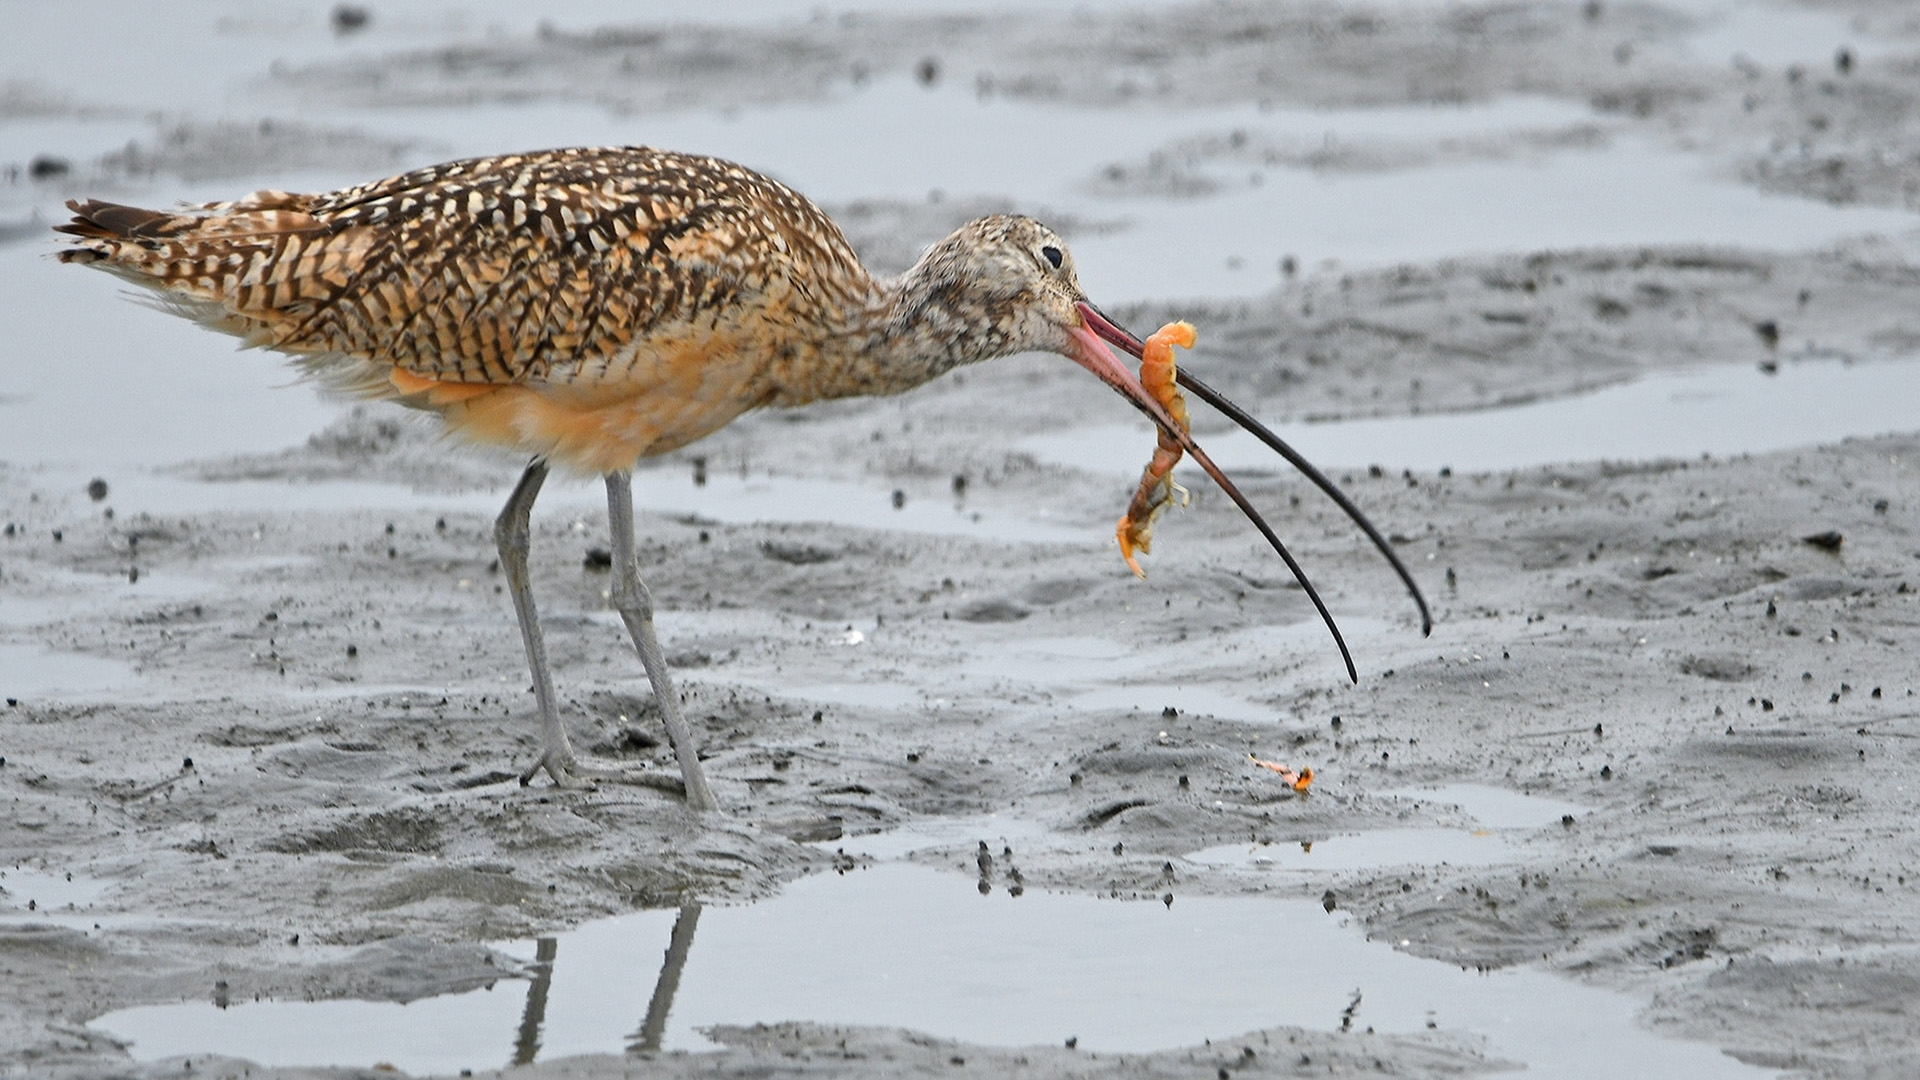 W-A-Long-billed-Curlew-fishing-in-the-tidelands-near-Moss-Landing-finds-a-shrimp-and-swallows-it-whole-NB-0-Place-by-Allan-Petersdorf-CC